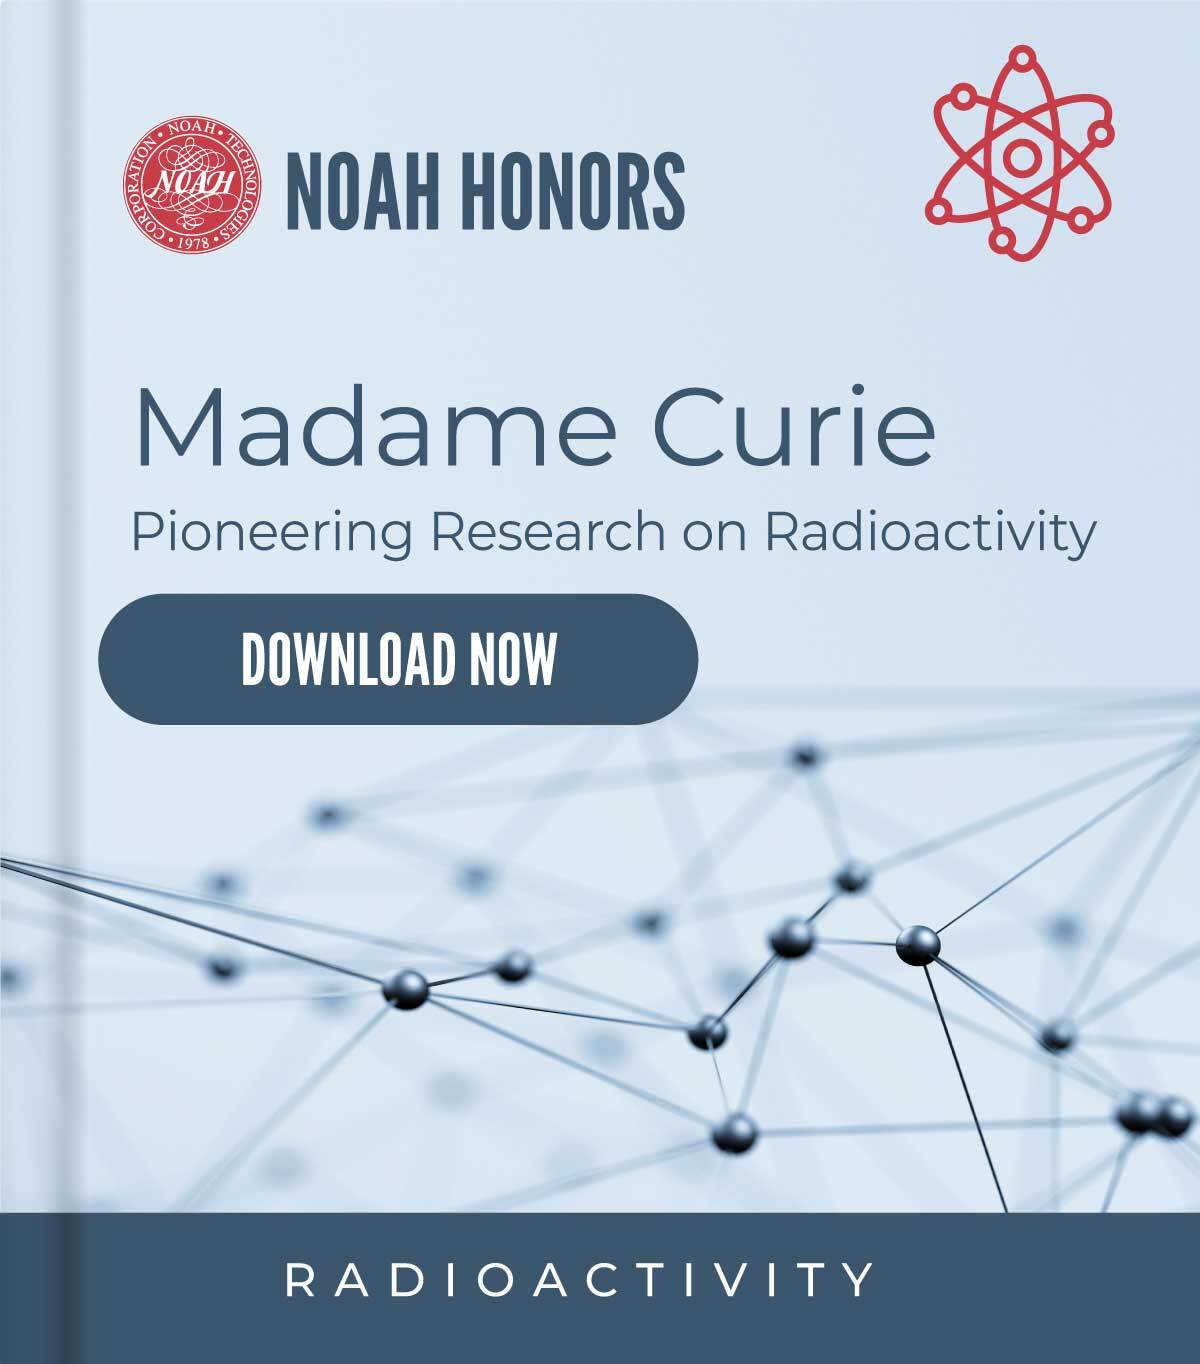 Noah honors Madame Curie cover graphic to download white paper now